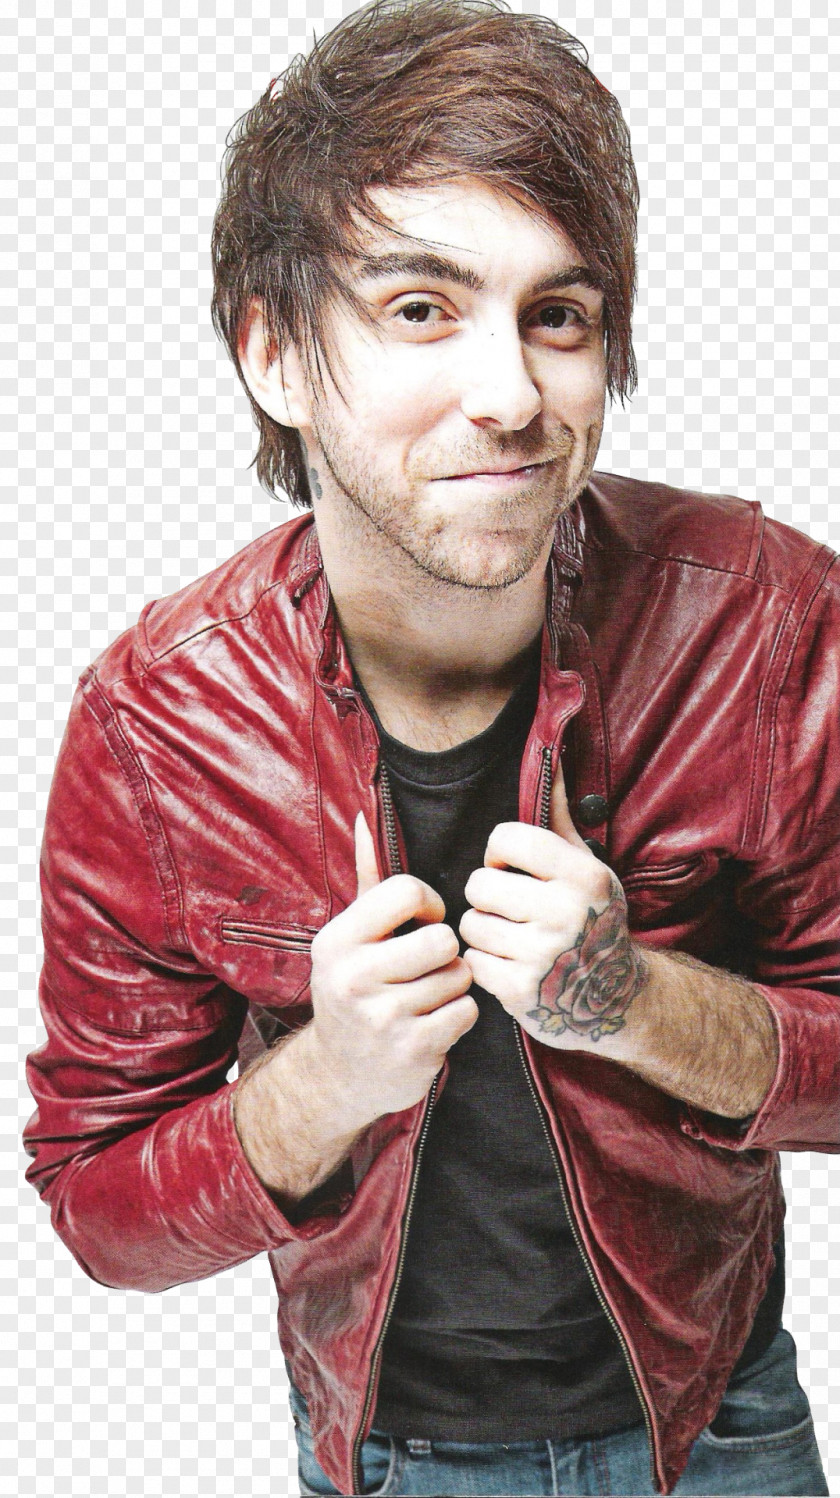 Alex Gaskarth All Time Low Sticks, Stones And Techno Musician Musical Ensemble PNG